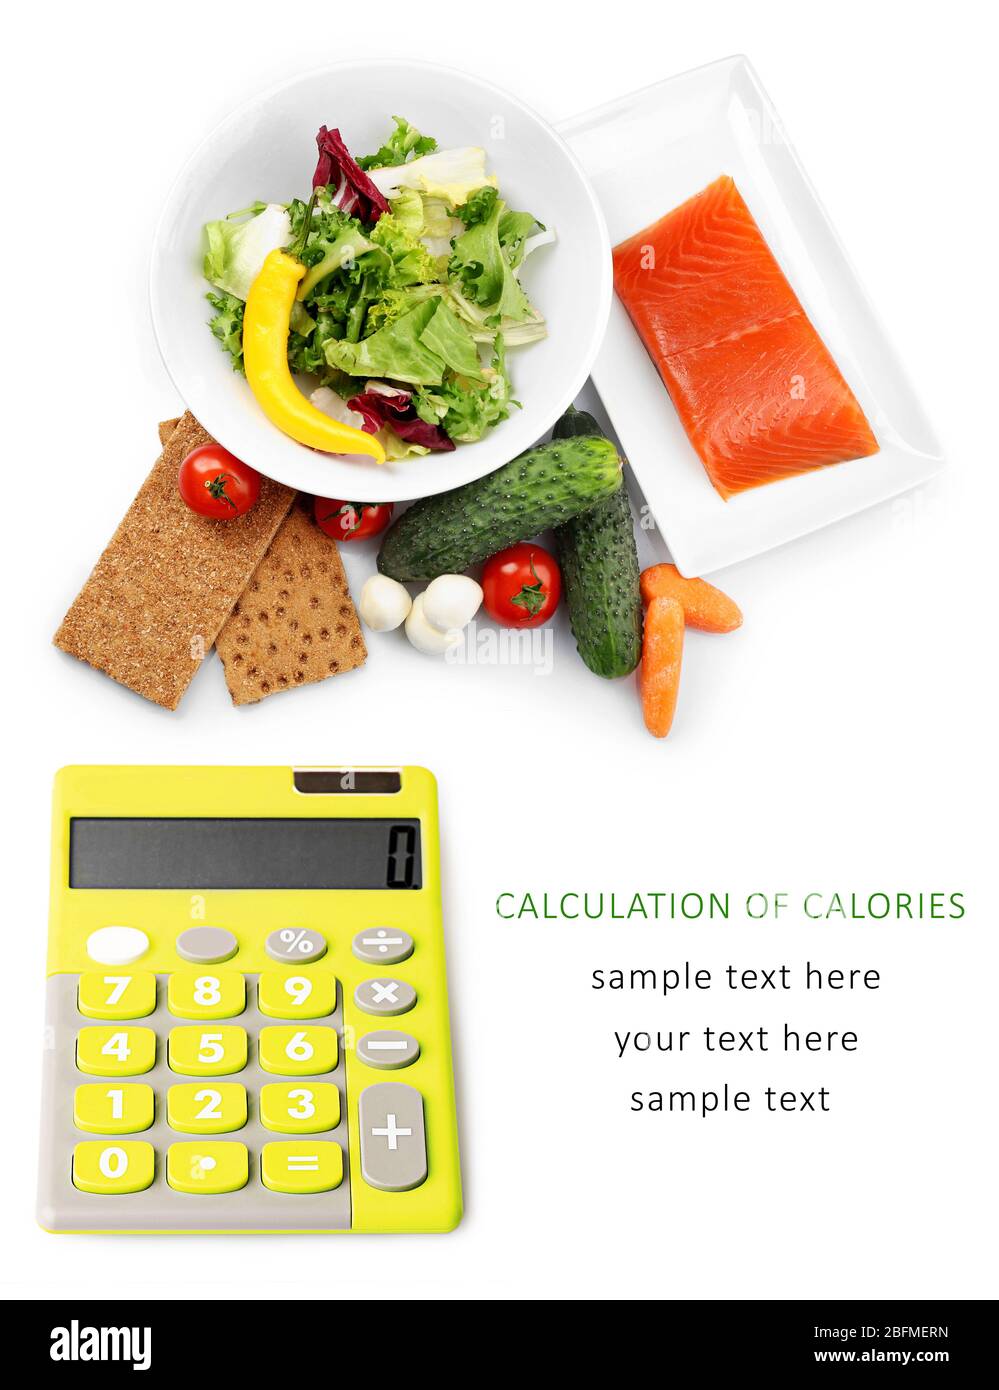 Food calorie calculator Cut Out Stock Images & Pictures - Alamy